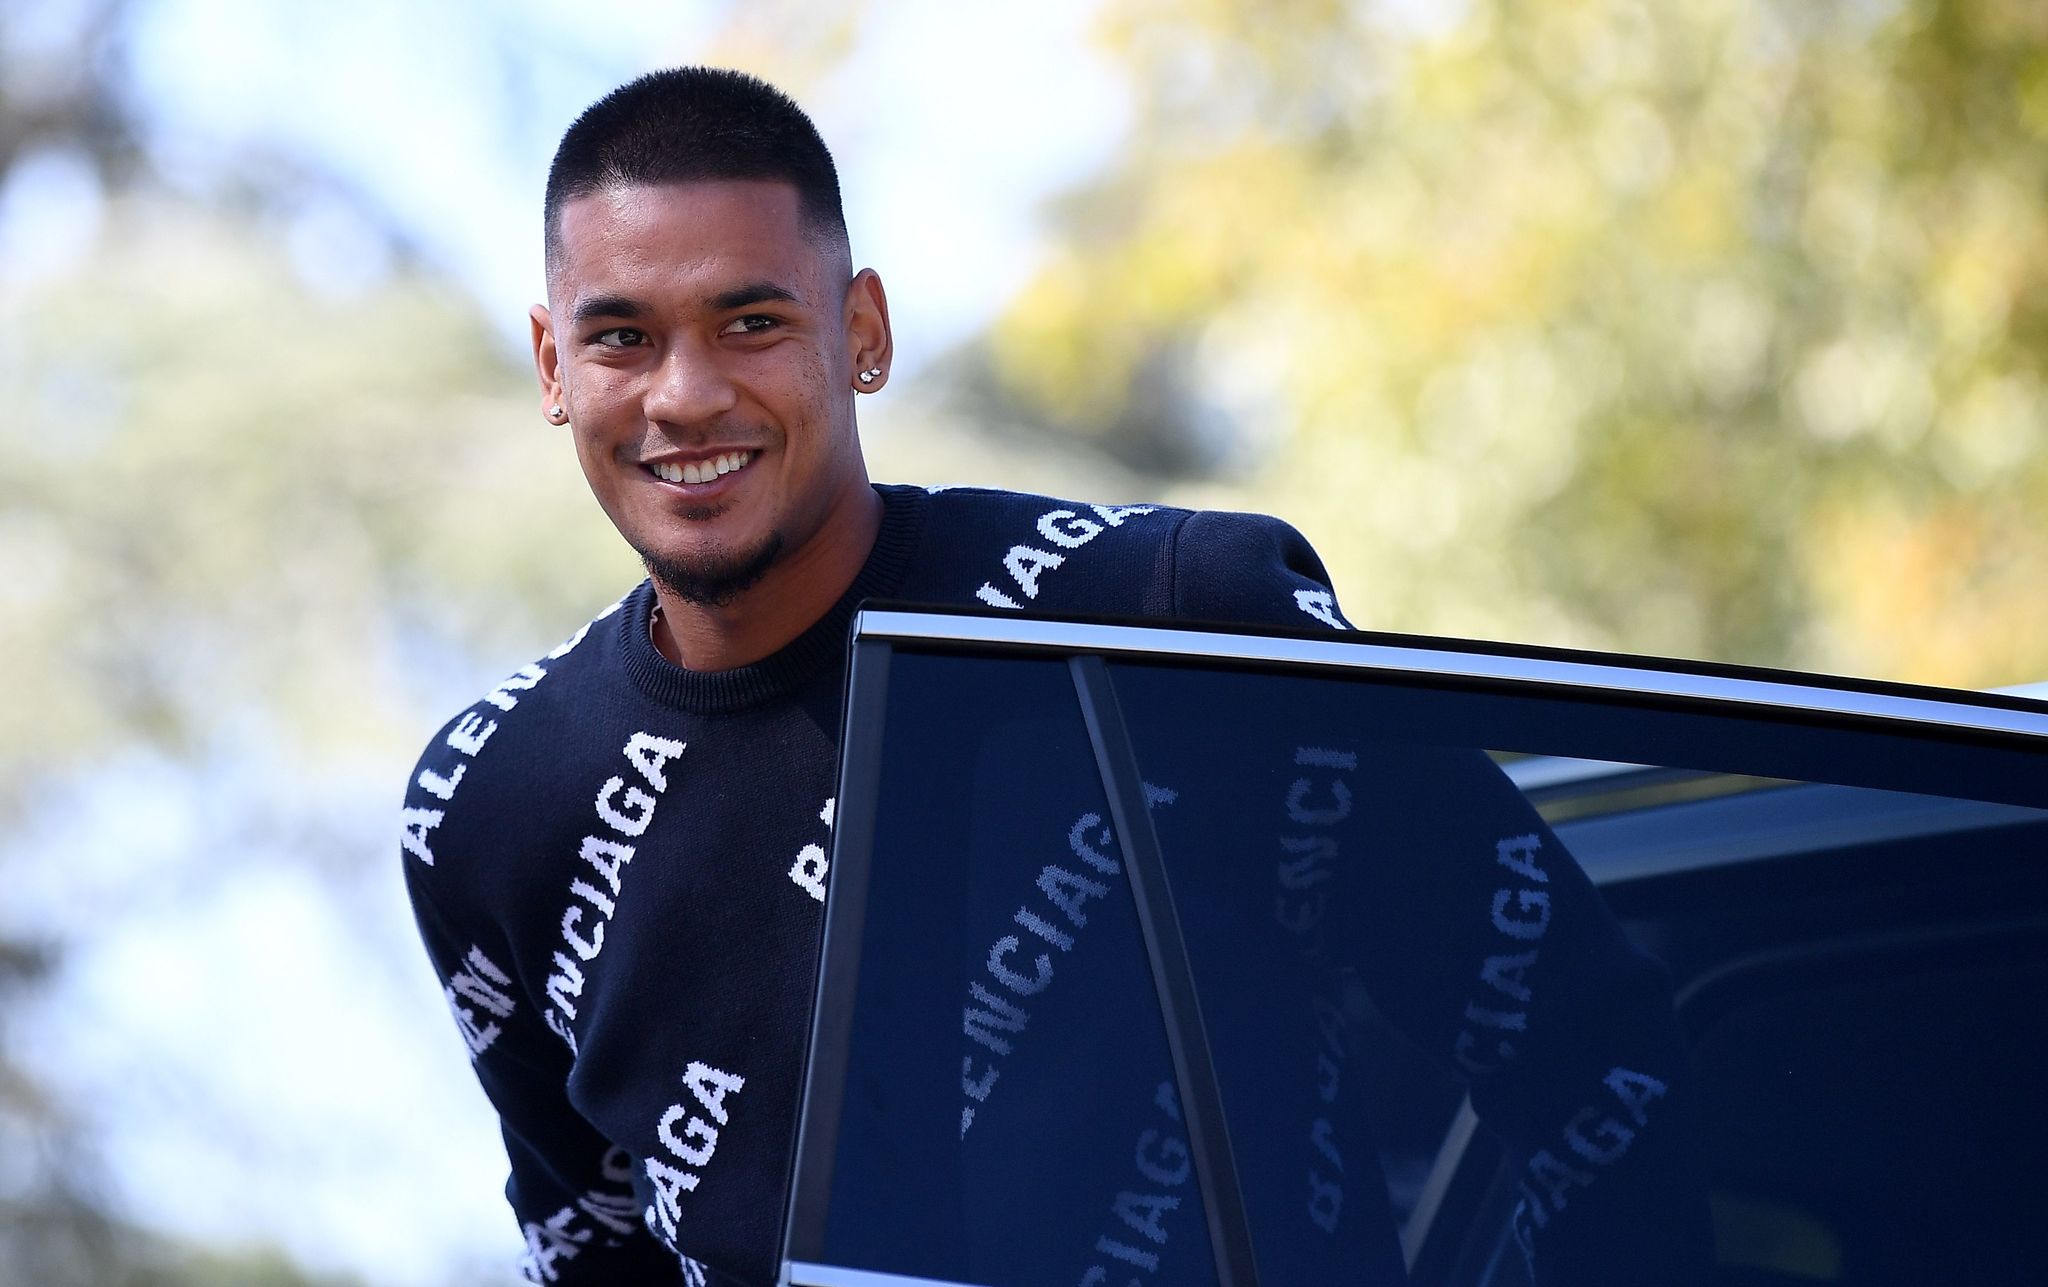 Frances goalkeeper Alphonse <HIT>Areola</HIT> arrives at the French national football team training base in Clairefontaine-en-Yvelines on September 2, 2019, as part of the teams preparation for the upcoming qualification Euro-2020 football matches. (Photo by FRANCK FIFE / AFP)